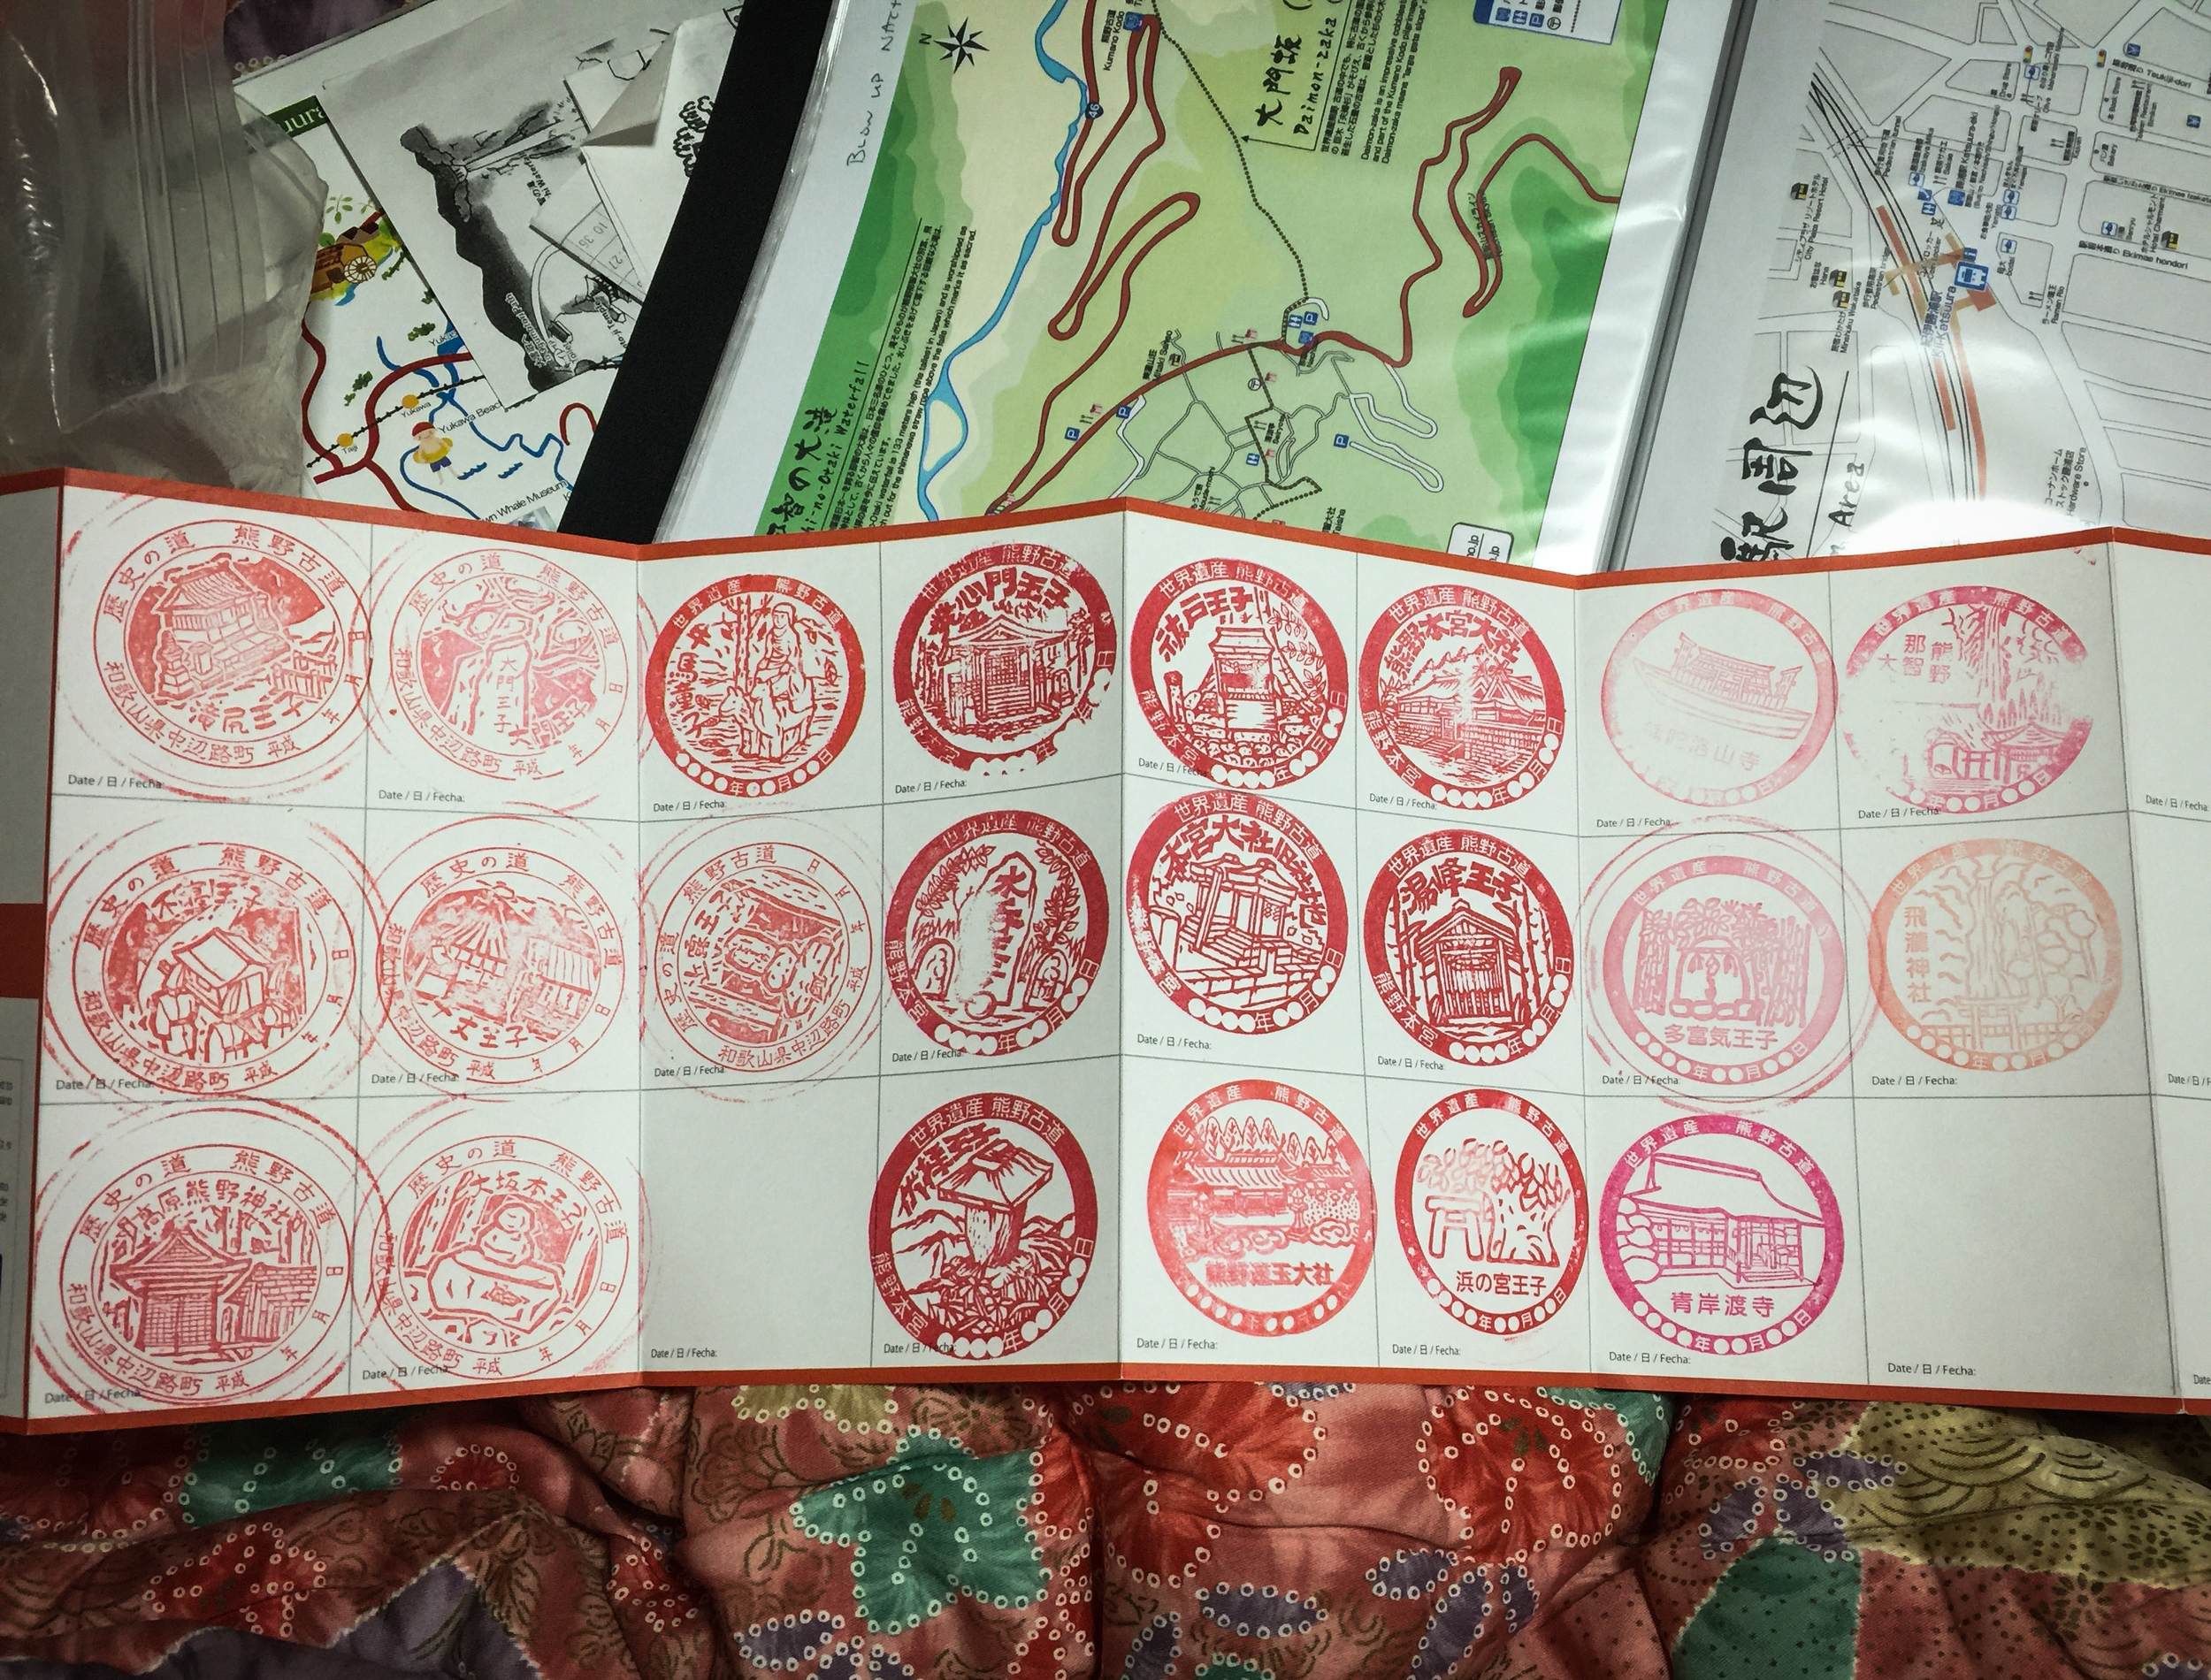 My pilgrimage passport with all of the stamps from along the way